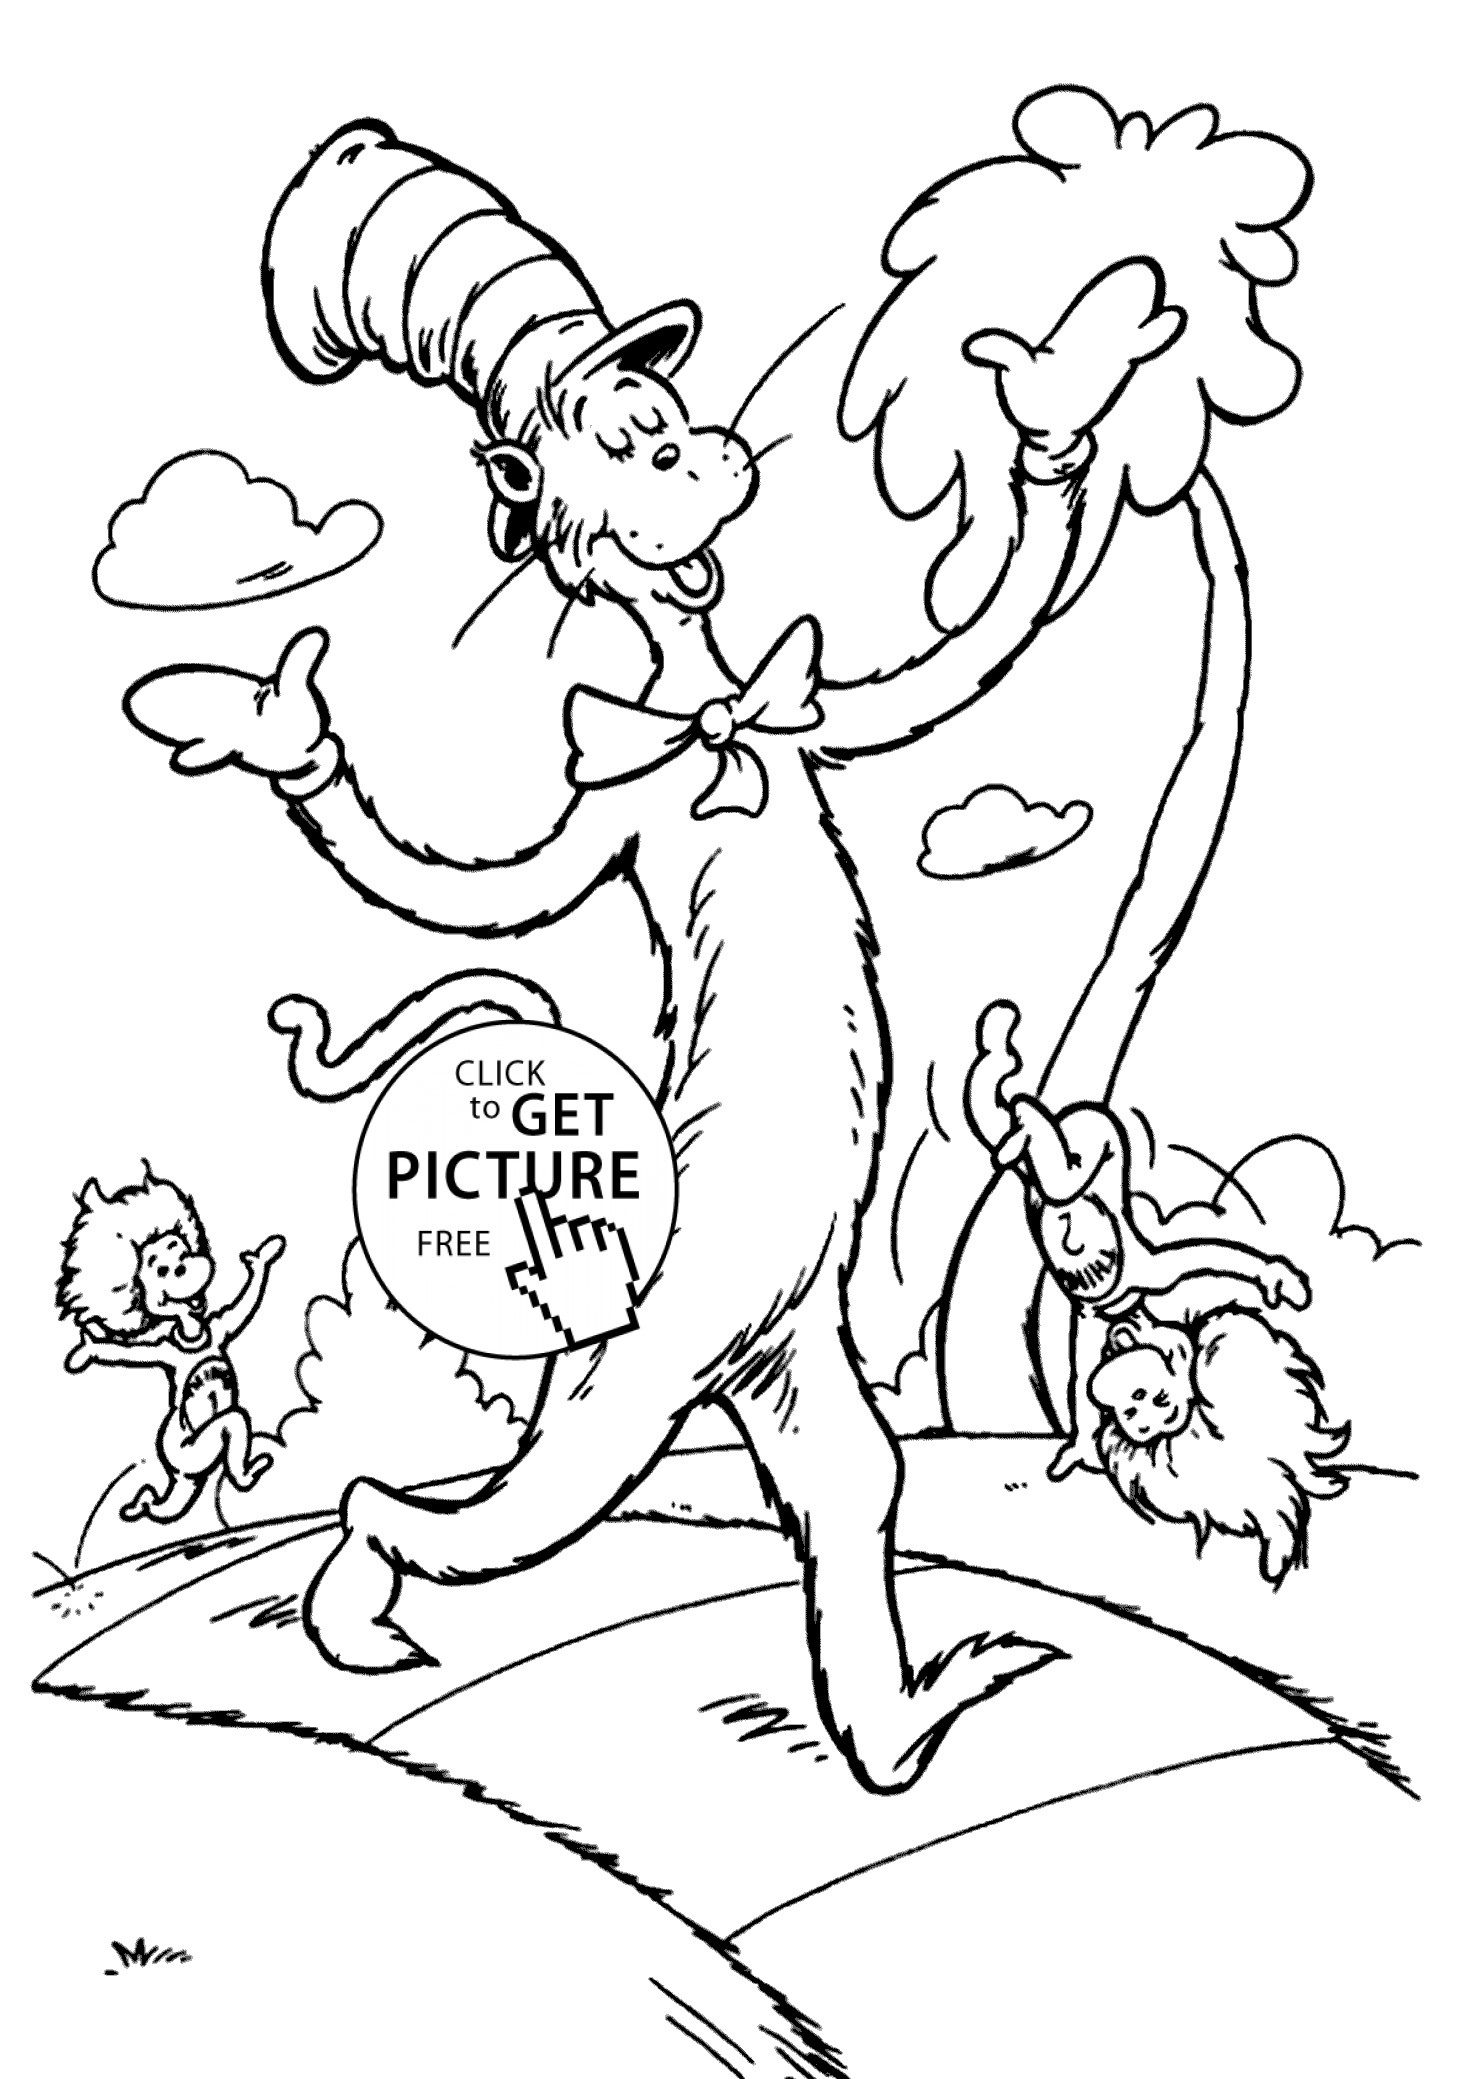 Dr. Seuss Coloring Pages For Kids
 The Сat in the hat and promenade coloring pages for kids